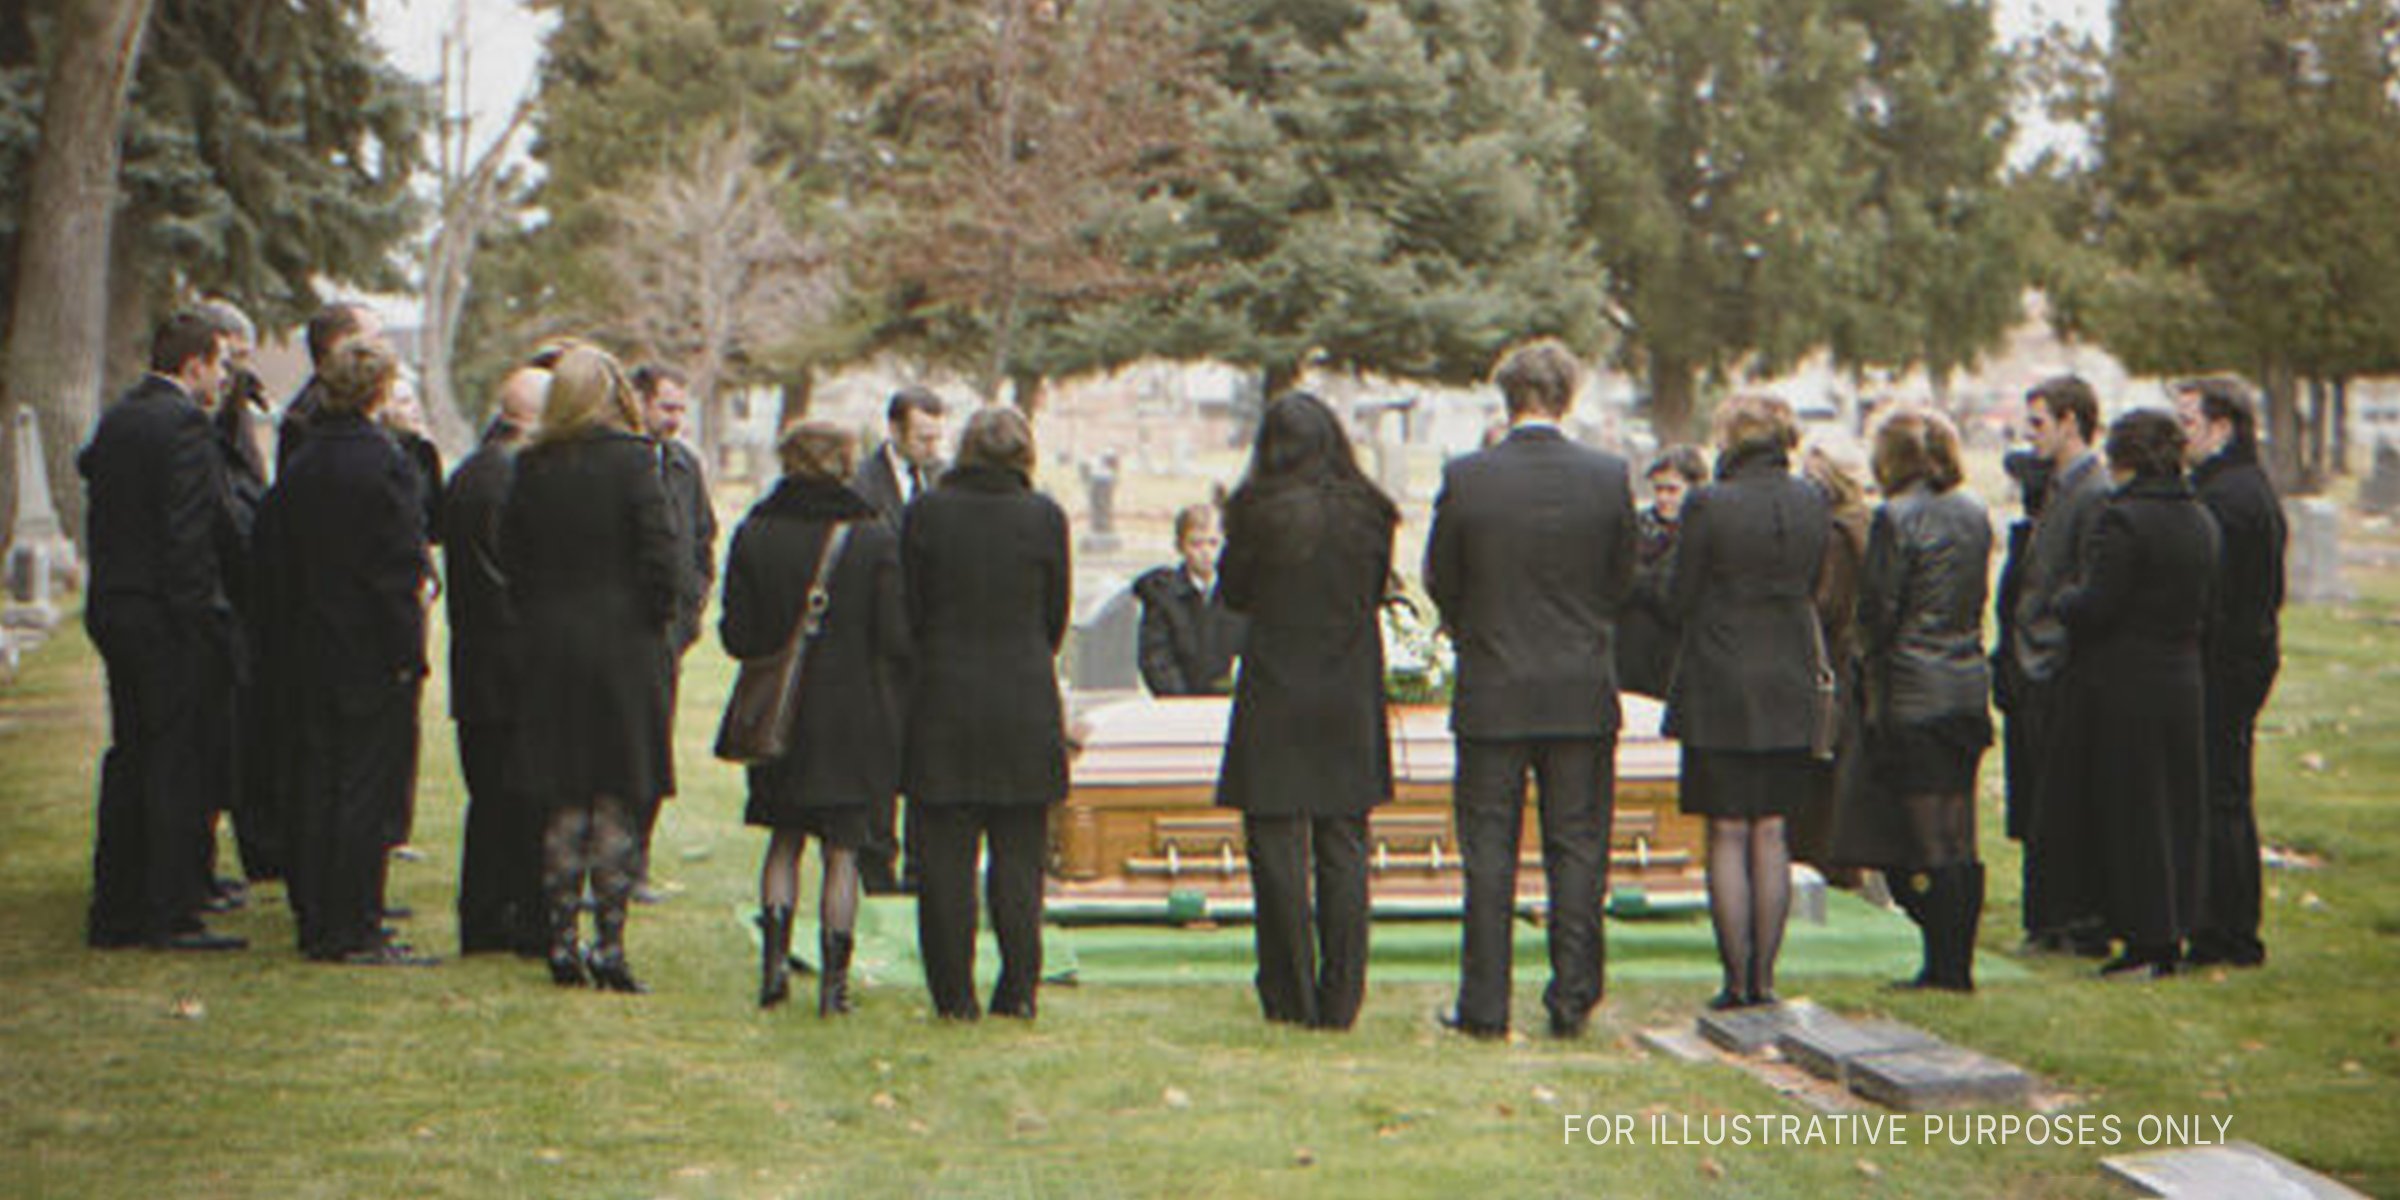 A Funeral | Source: Getty Images